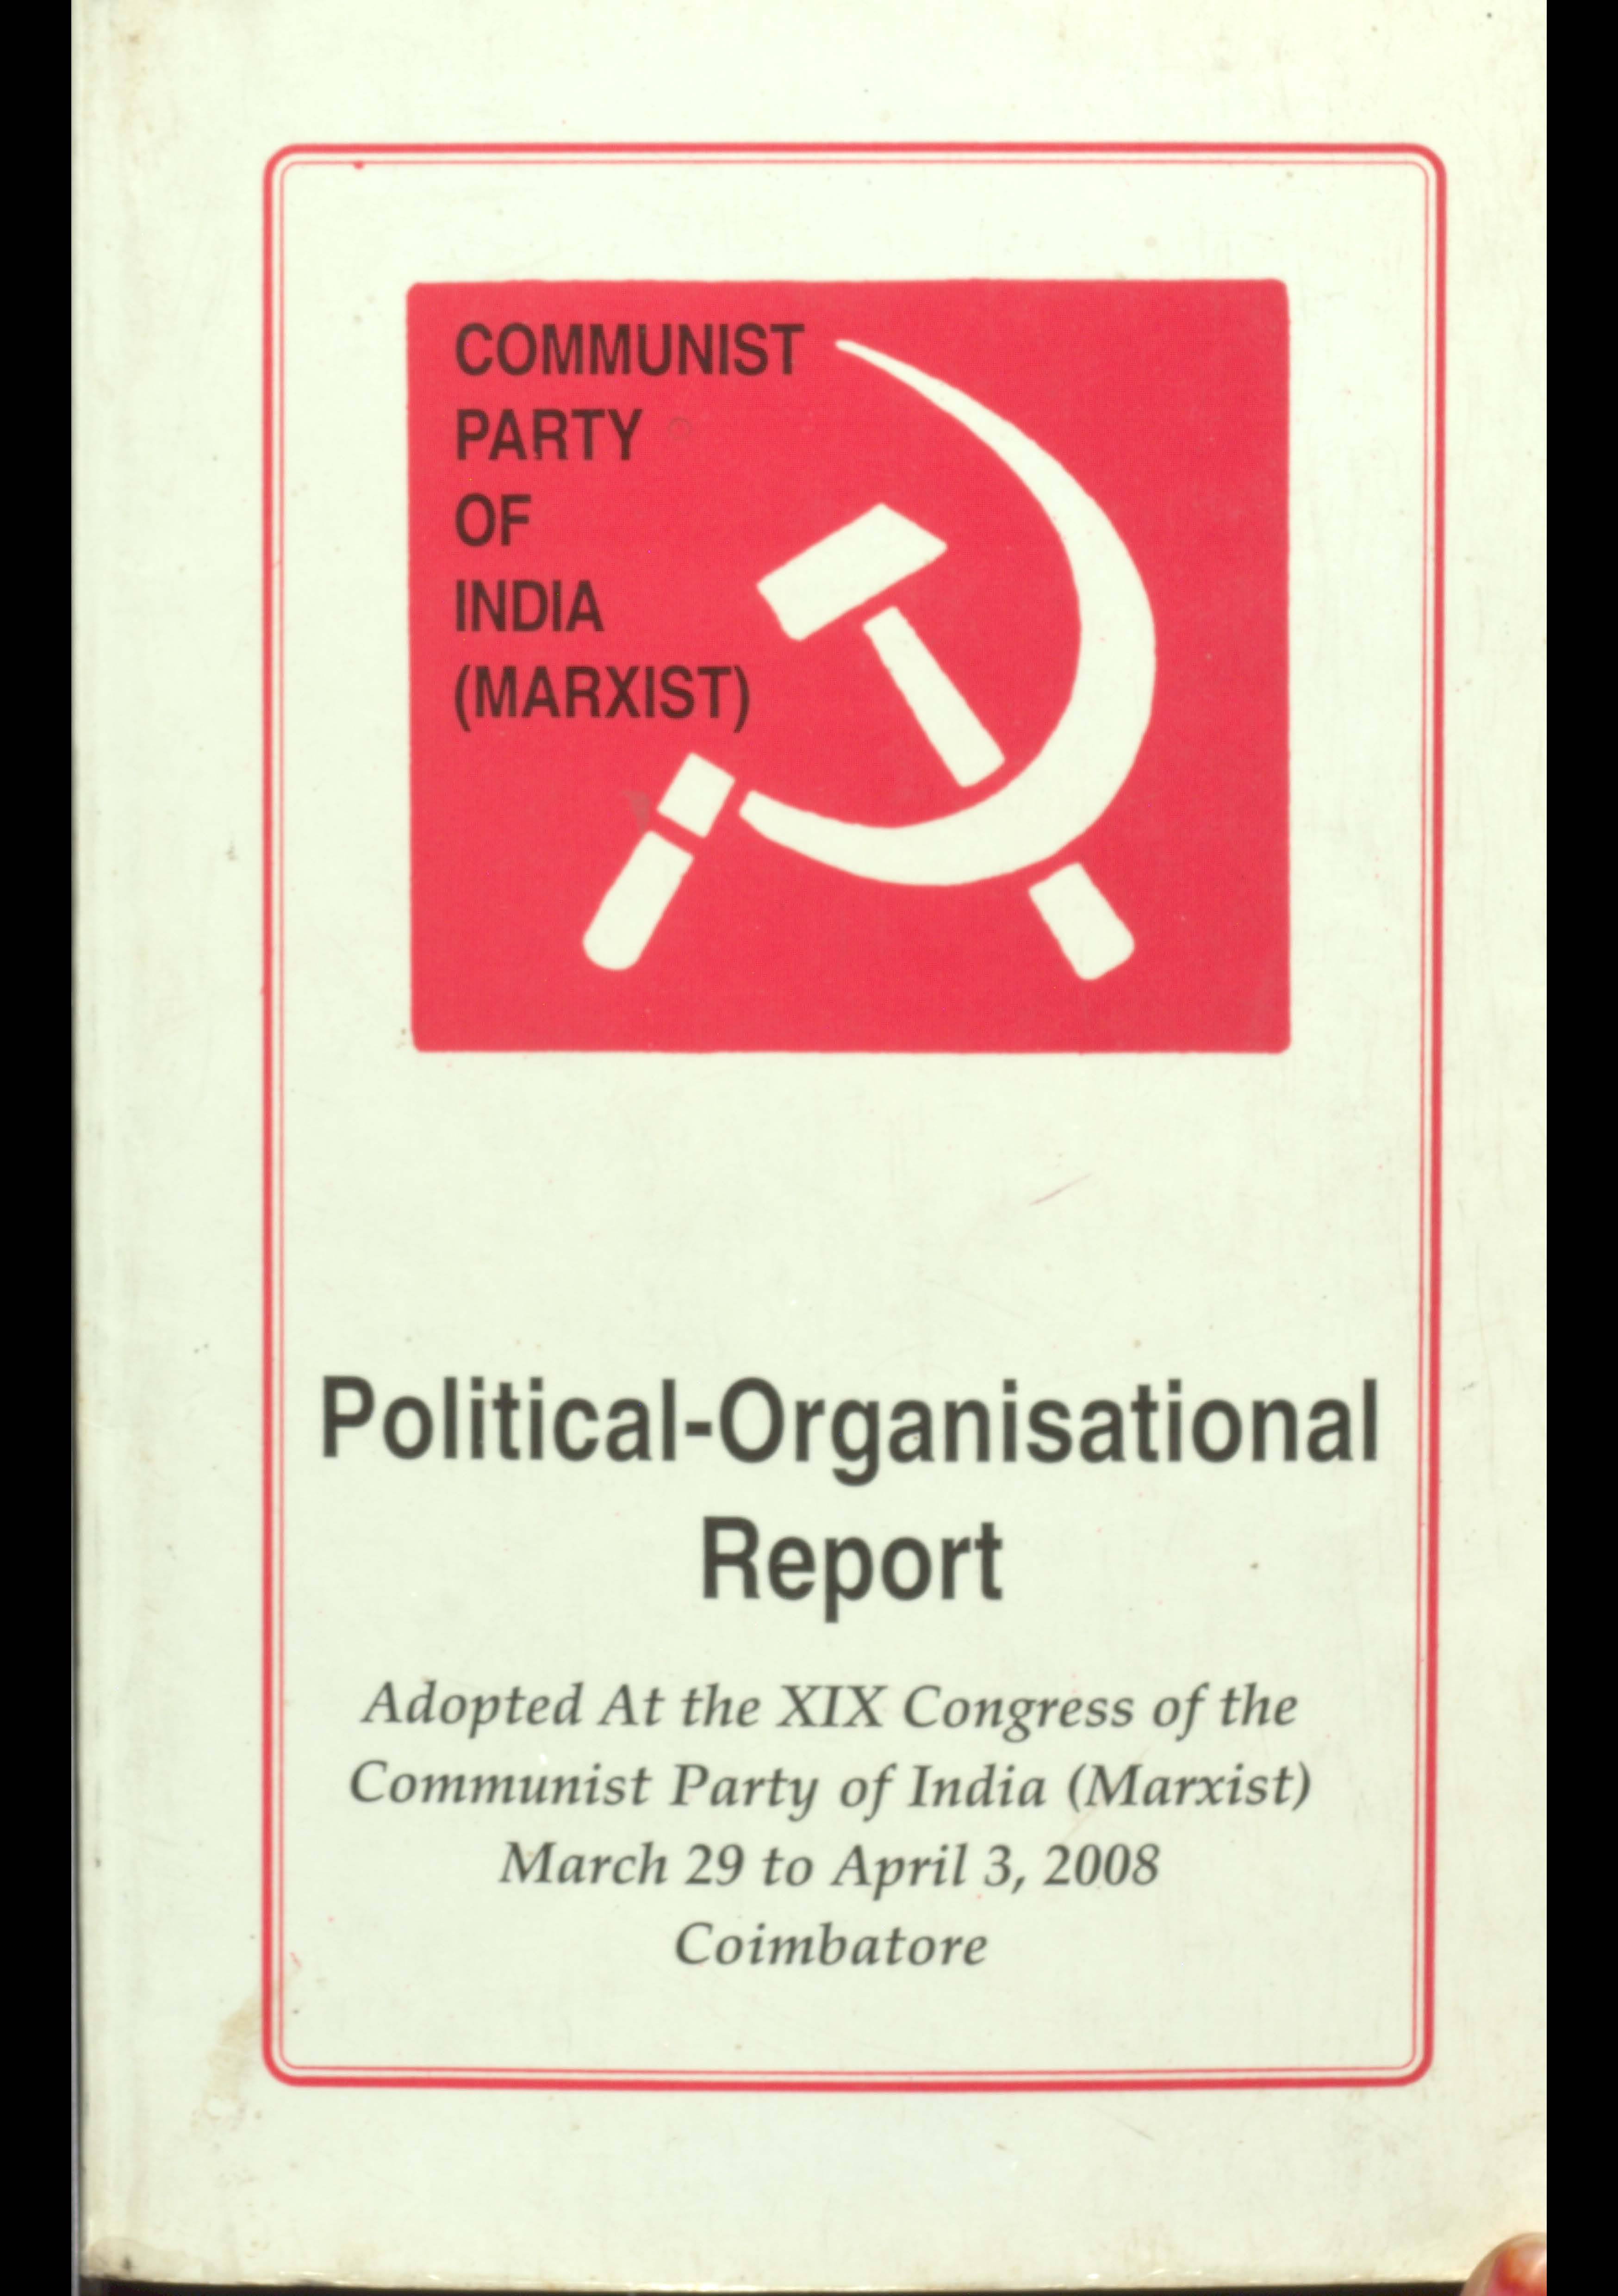 Political - Organistional Report (January 26-31, 1982)